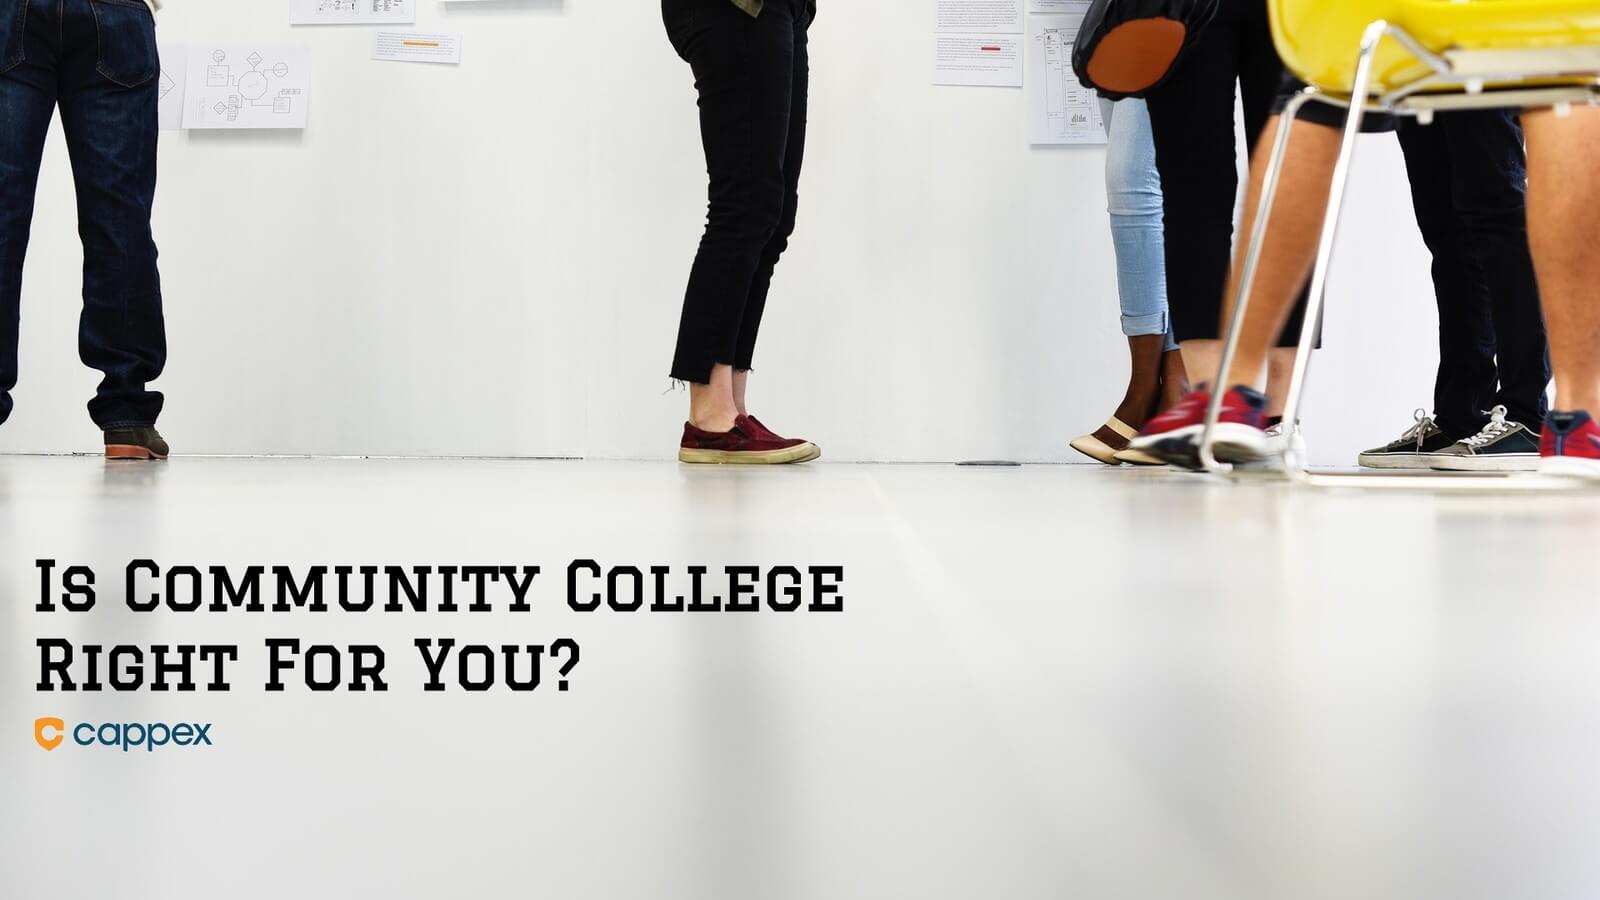 Is Community College for You?